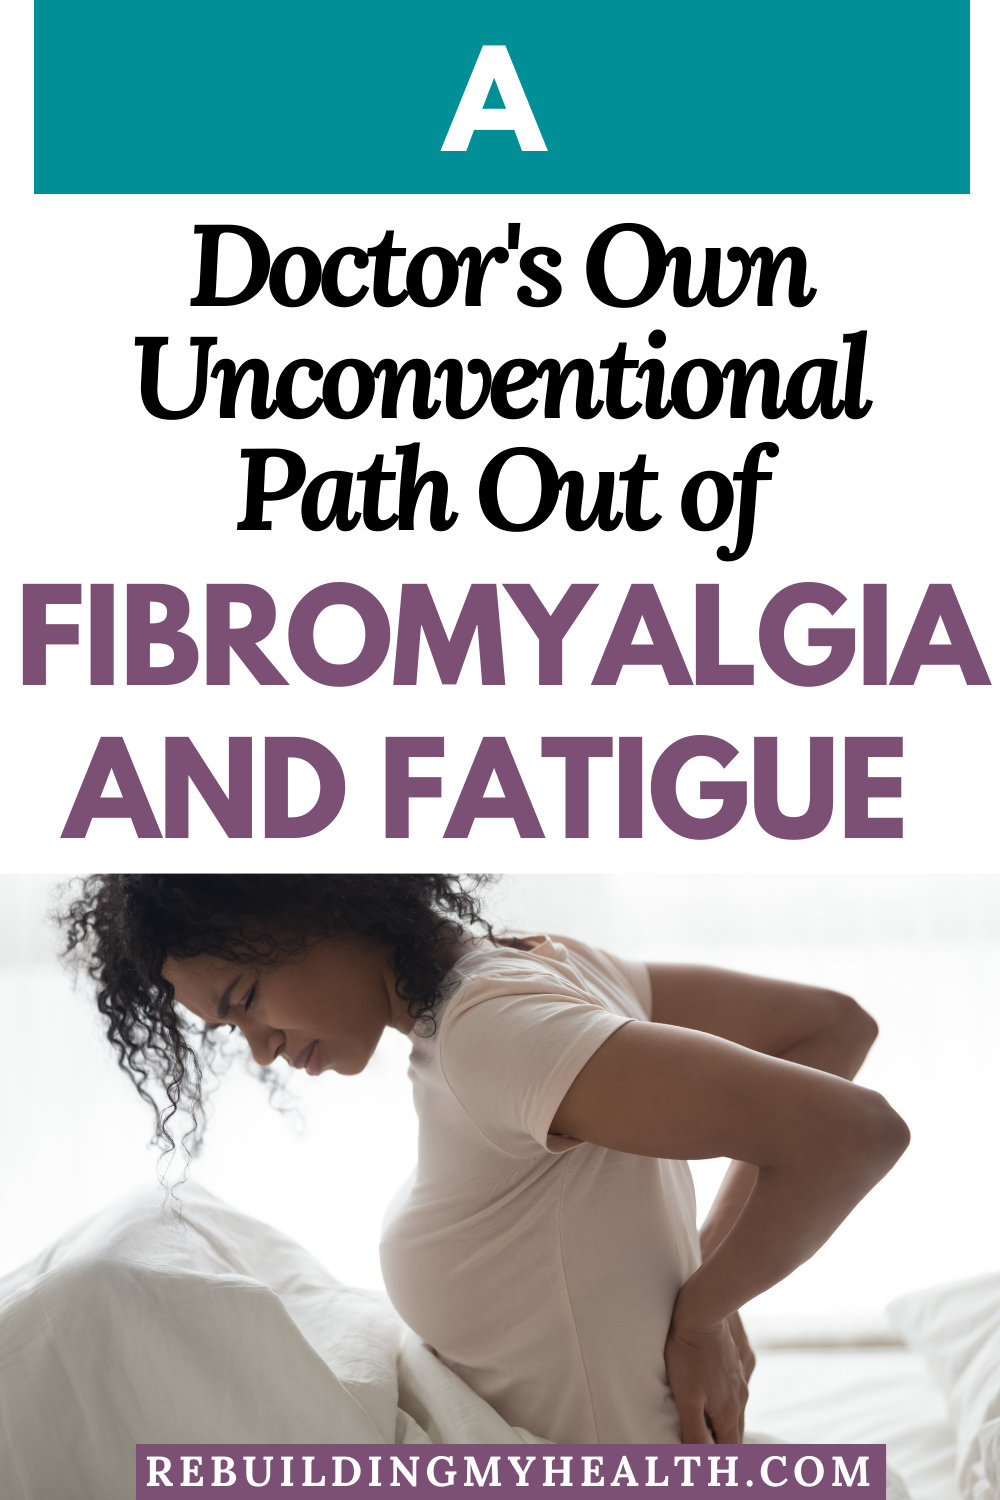 Learn about natural fibromyaliga treatment. A functional medicine doctor stopped pain, fatigue, IBS, GERD, depression and anxiety naturally with hormone balancing and detox.